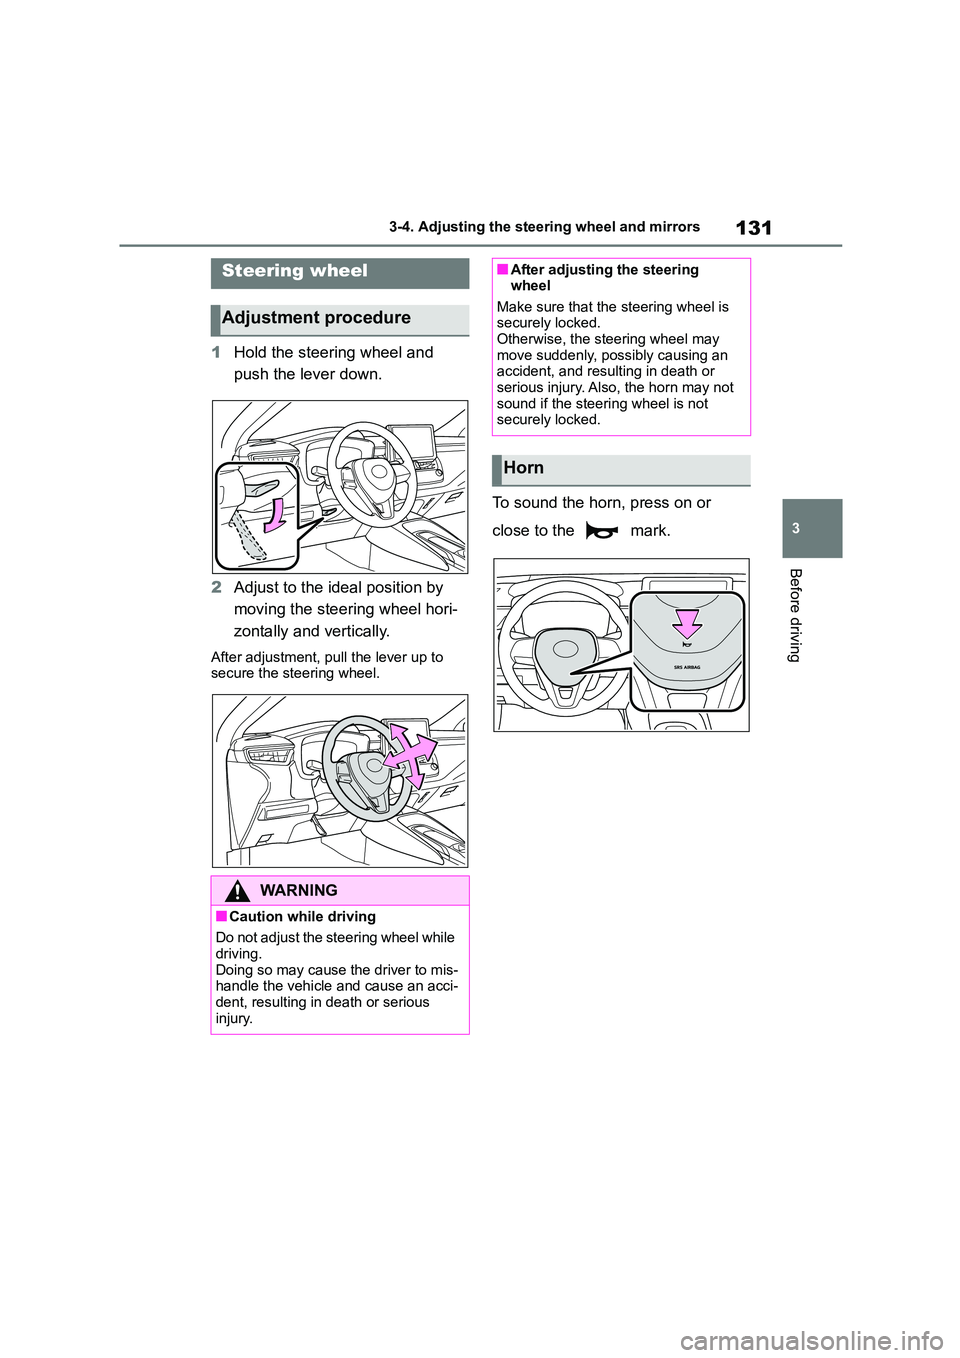 TOYOTA COROLLA 2022  Owners Manual (in English) 131
3 
3-4. Adjusting the steering wheel and mirrors
Before driving
3-4.Adjusting the steering wheel and mirrors
1 Hold the steering wheel and  
push the lever down. 
2 Adjust to the ideal position by